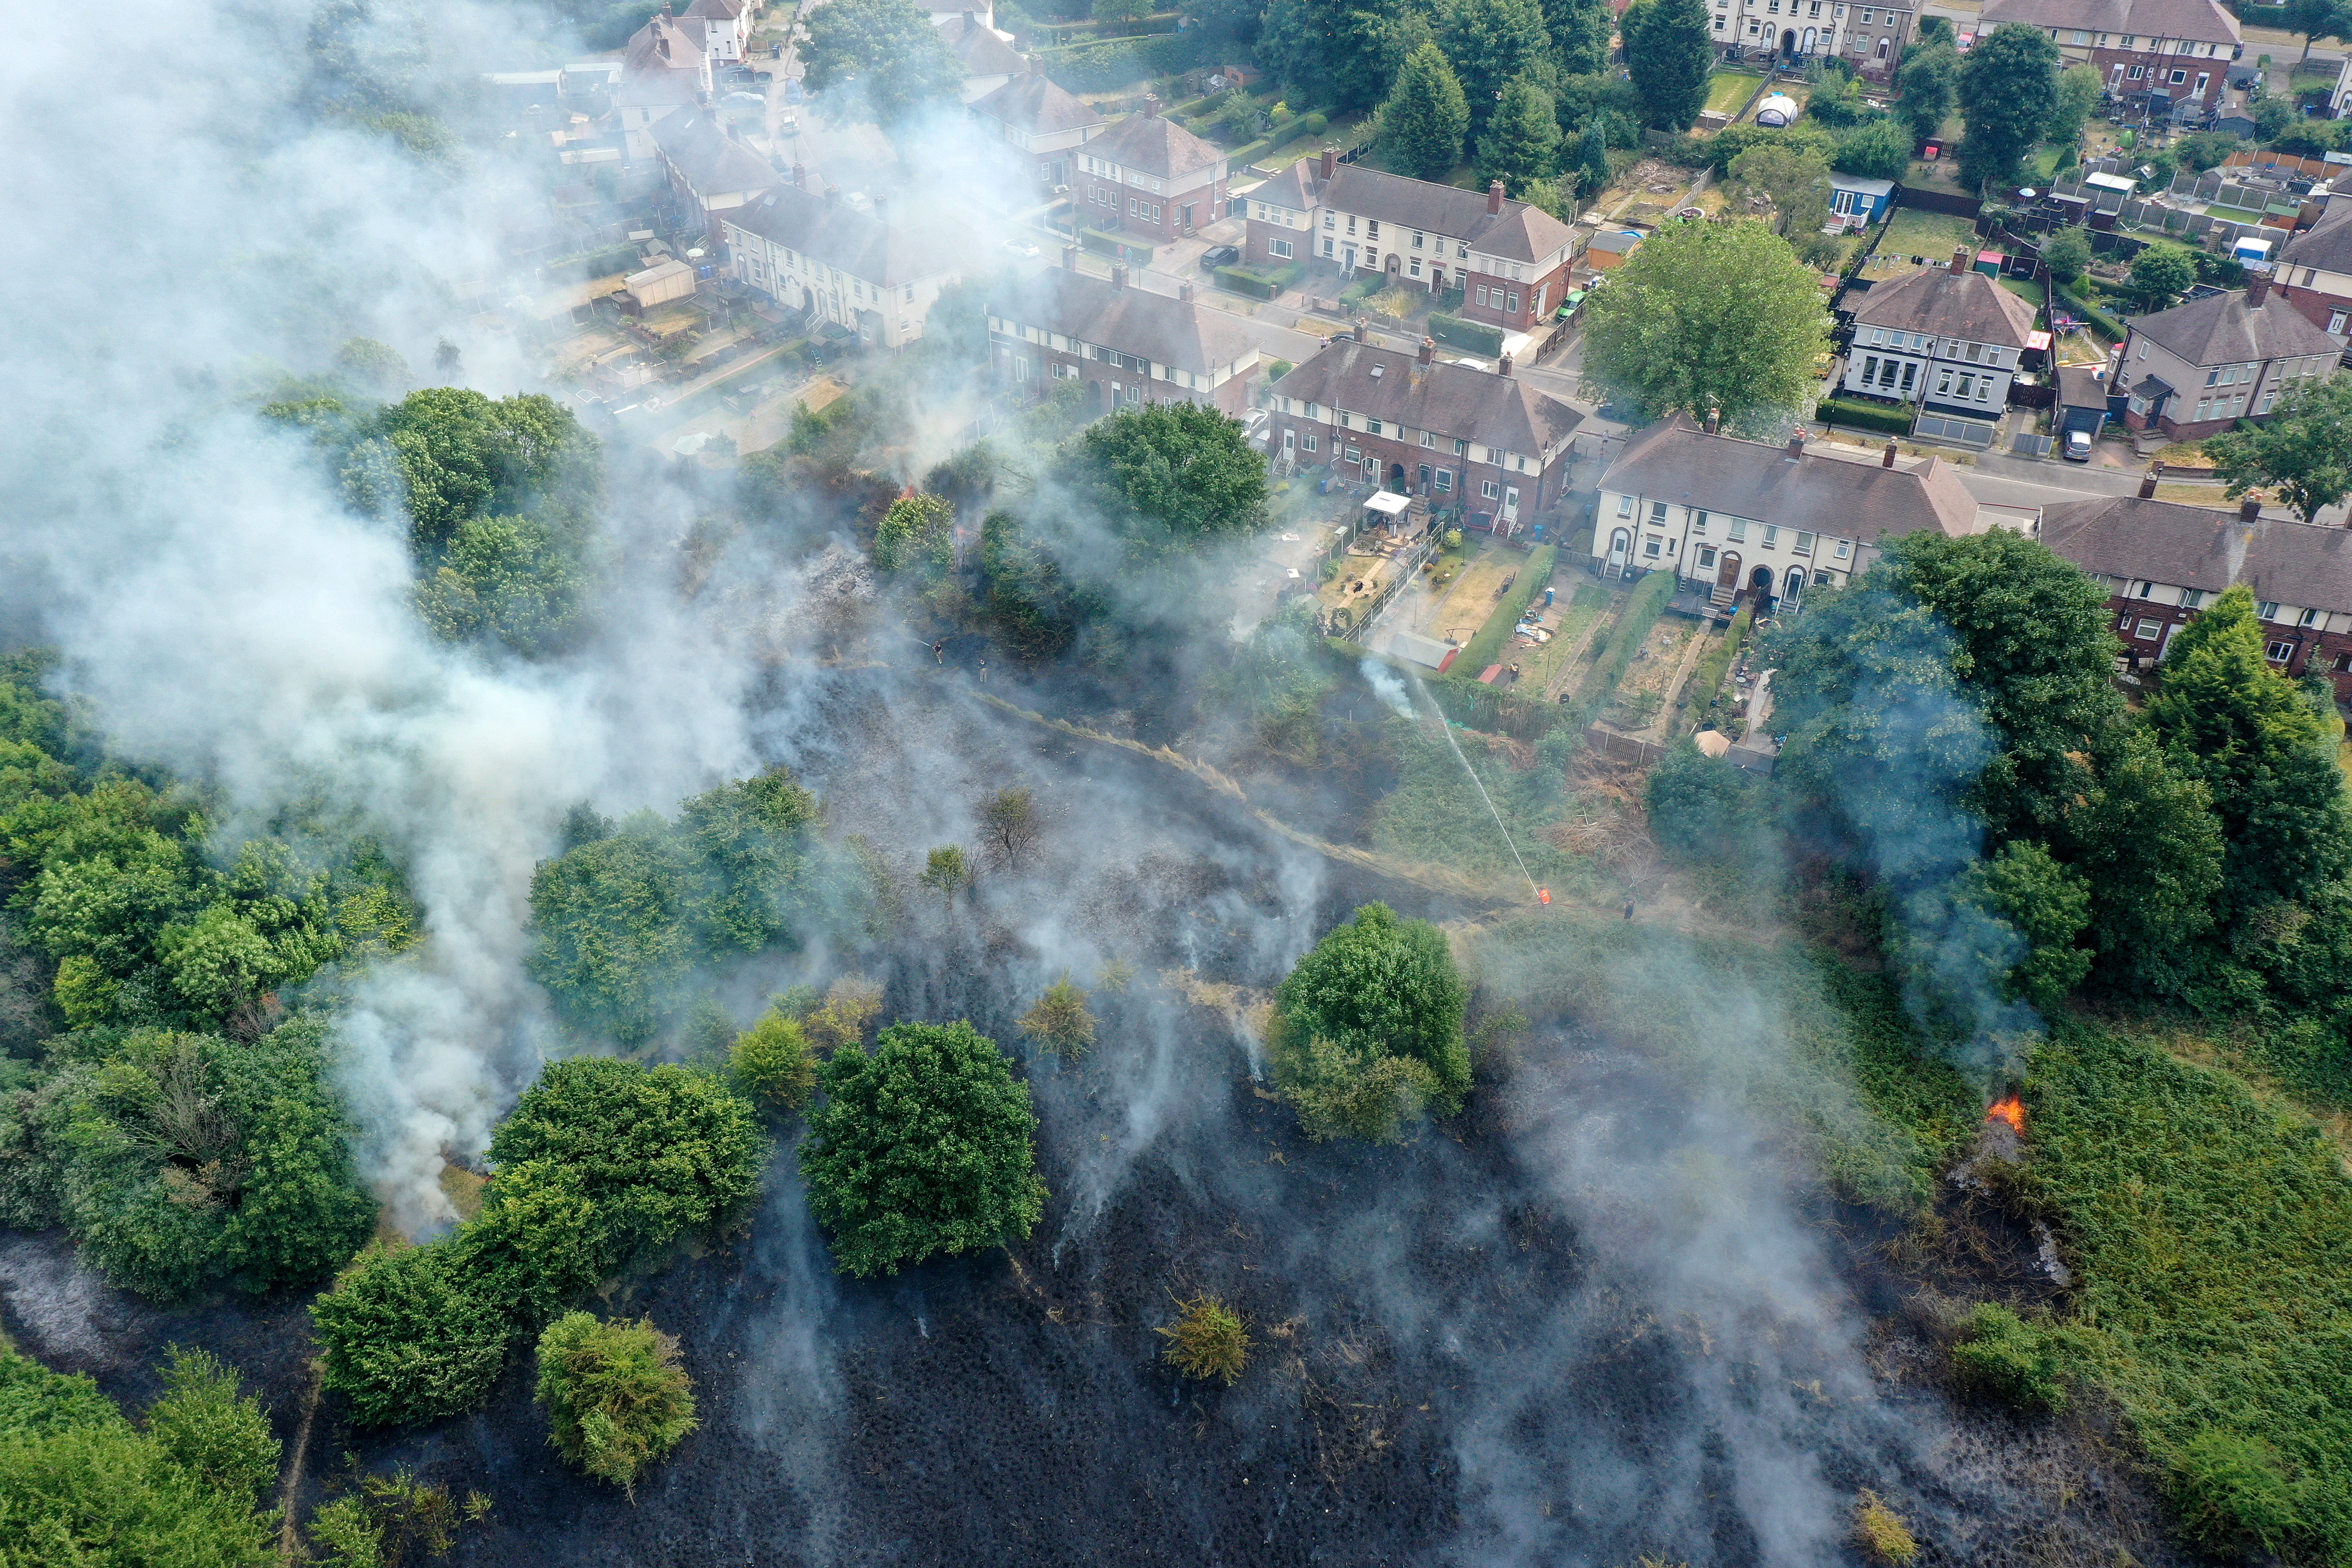 Firefighters contain a wildfire that encroached on nearby homes in the Shiregreen area of Sheffield on 20 July 2022 in Sheffield, England